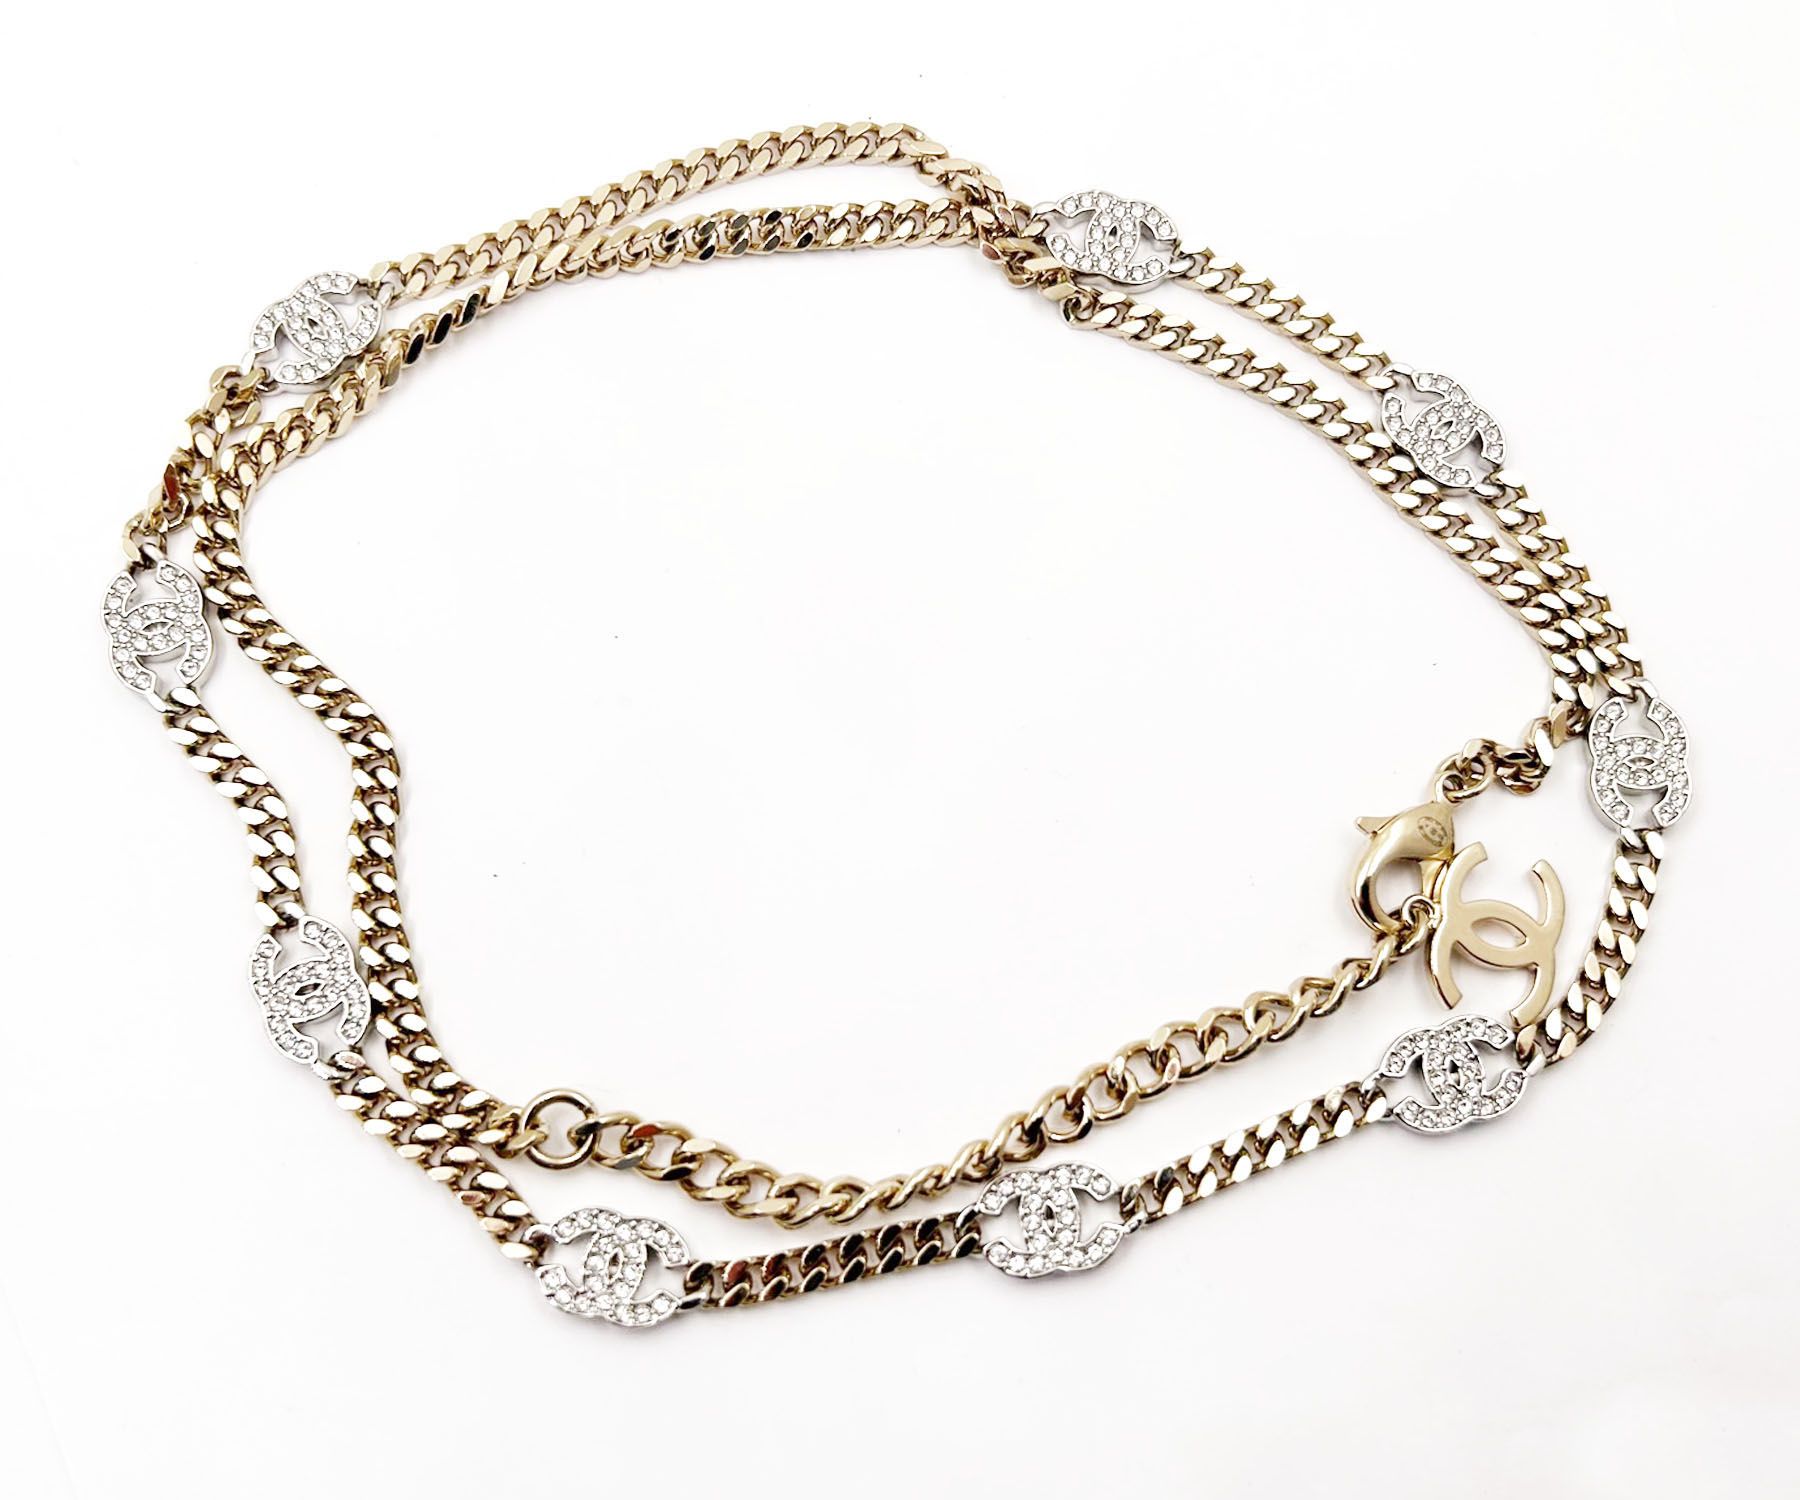 Chanel Choker Necklace Here Mark Black Gold Rhinestone Special